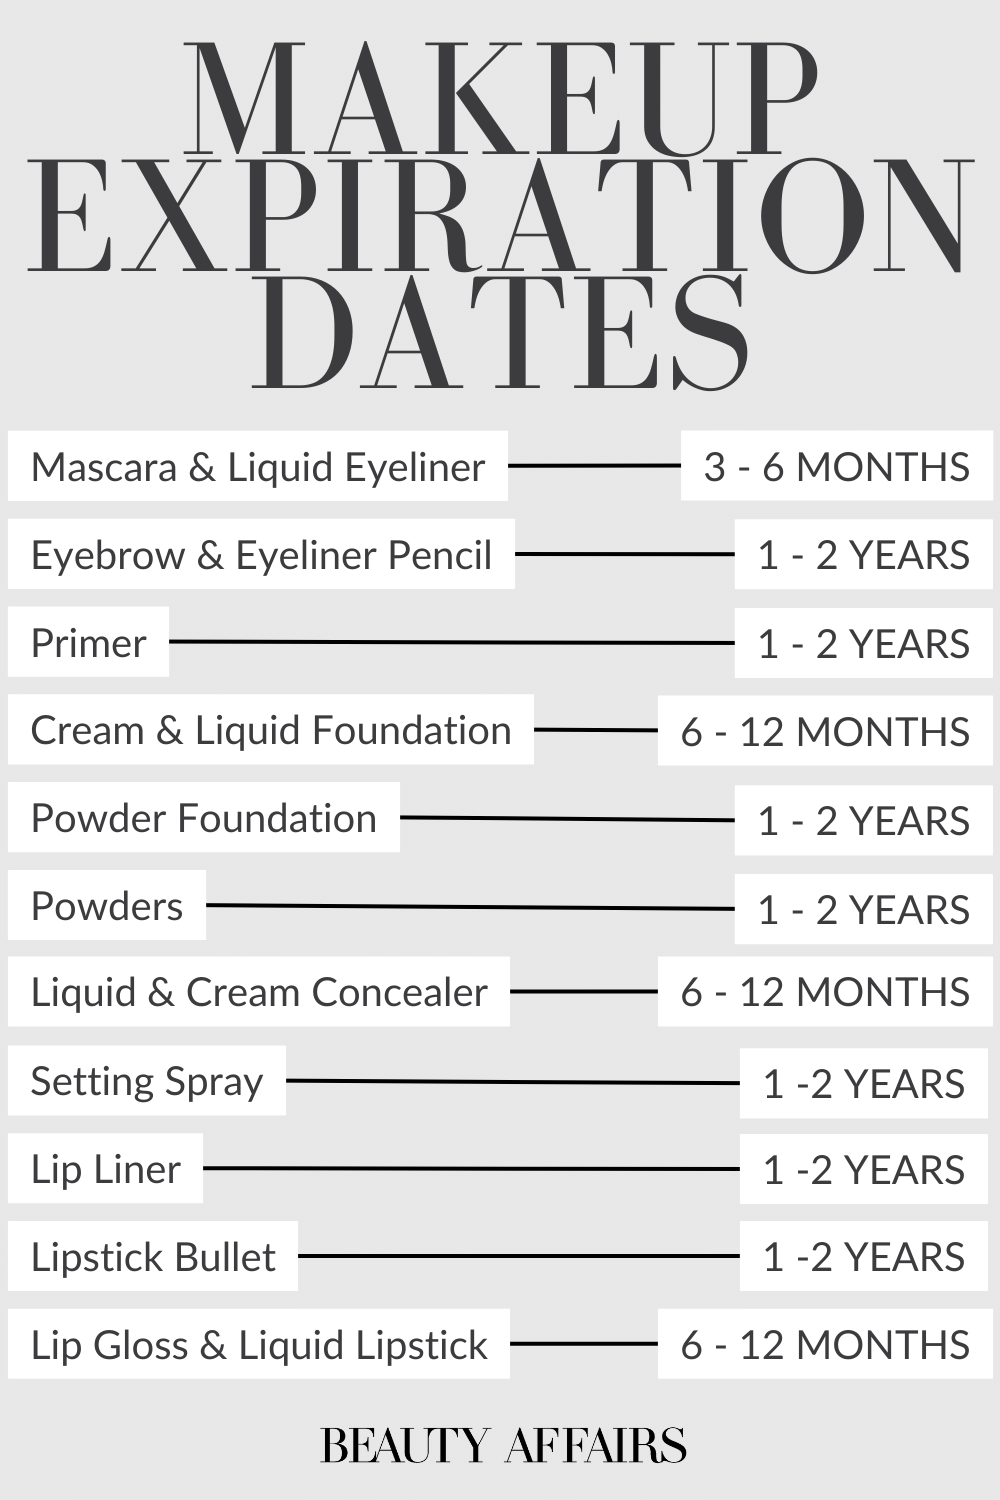 Makeup Expiration Date Chart showing how long makeup lasts for